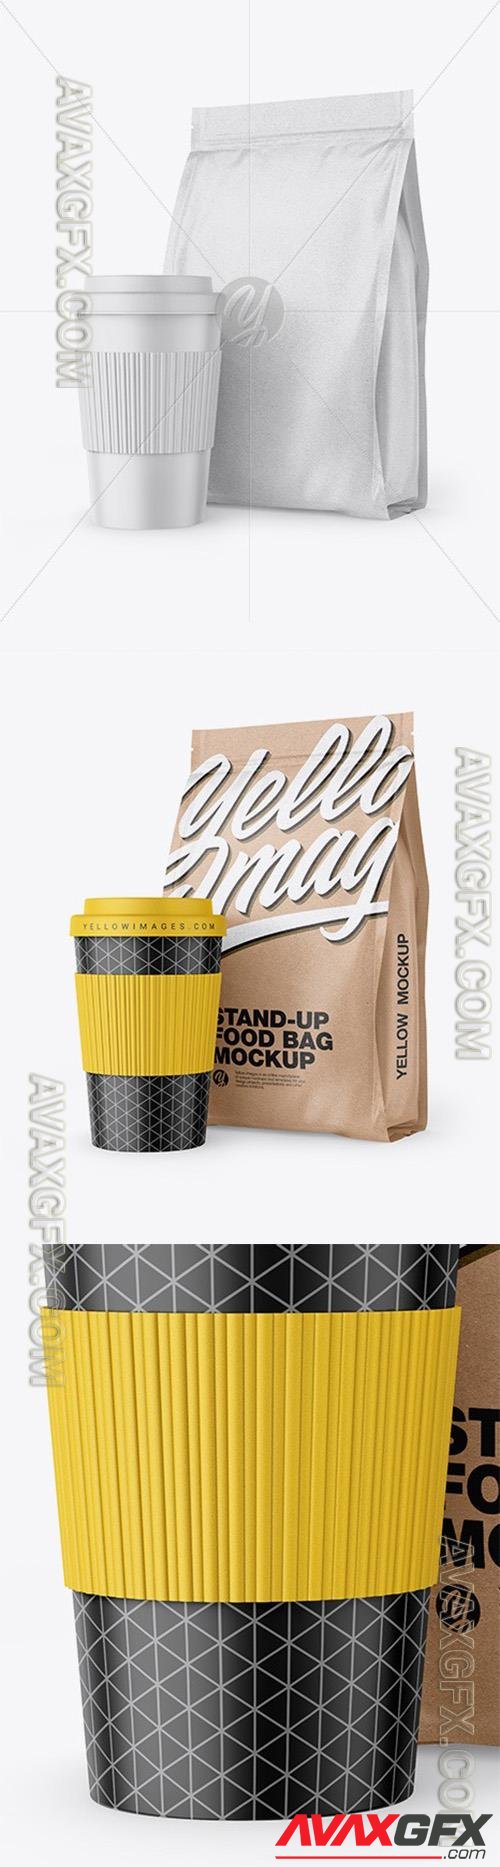 Kraft Stand-Up Bag with Coffee Cup Mockup 64783 TIF